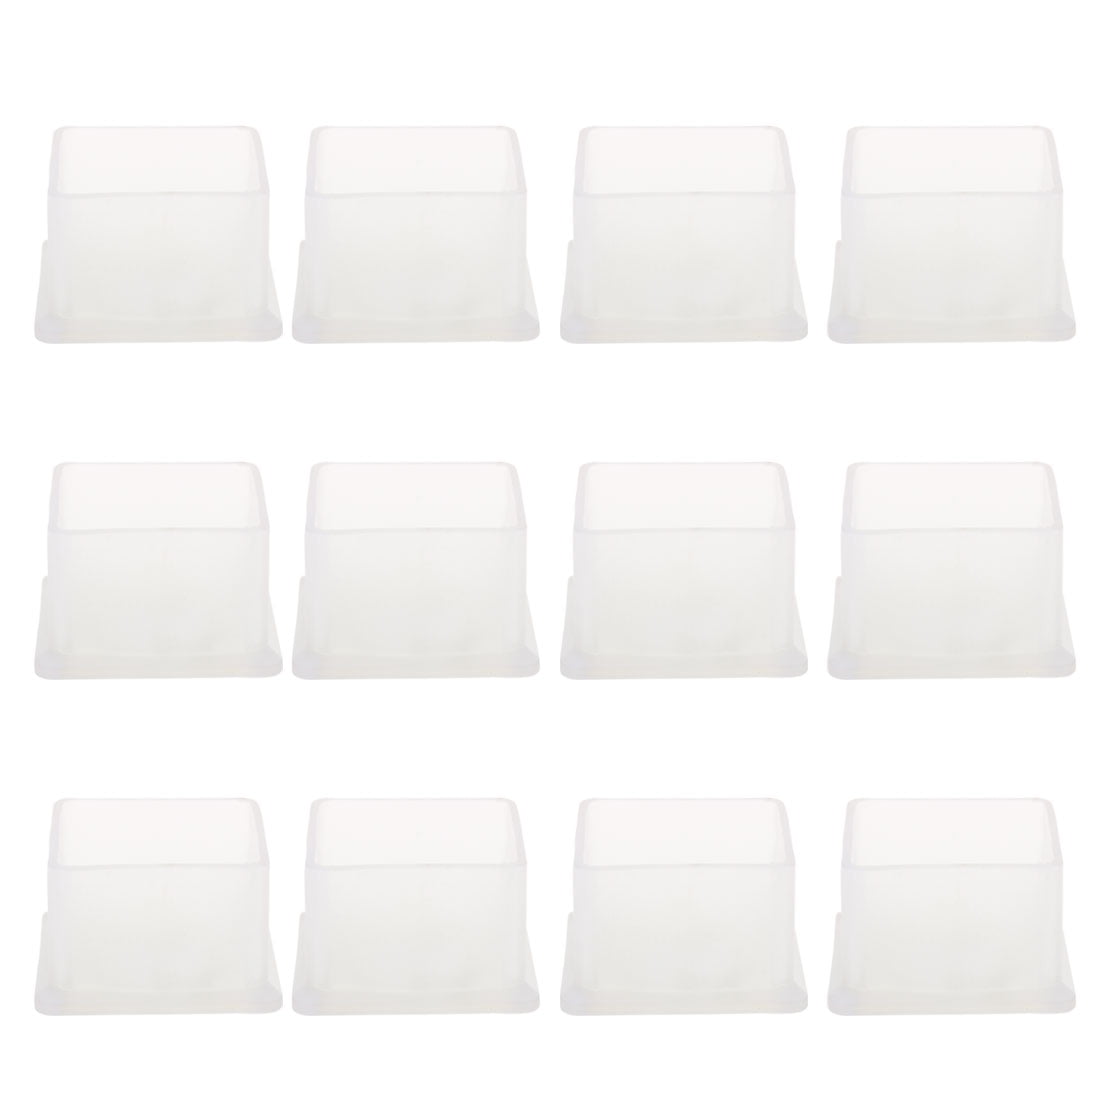 NUOLUX Chair Leg Caps 8pcs Square Silicone Chair Leg Caps Cups Pads Furniture Table Covers Floor Protectors 38*38mm